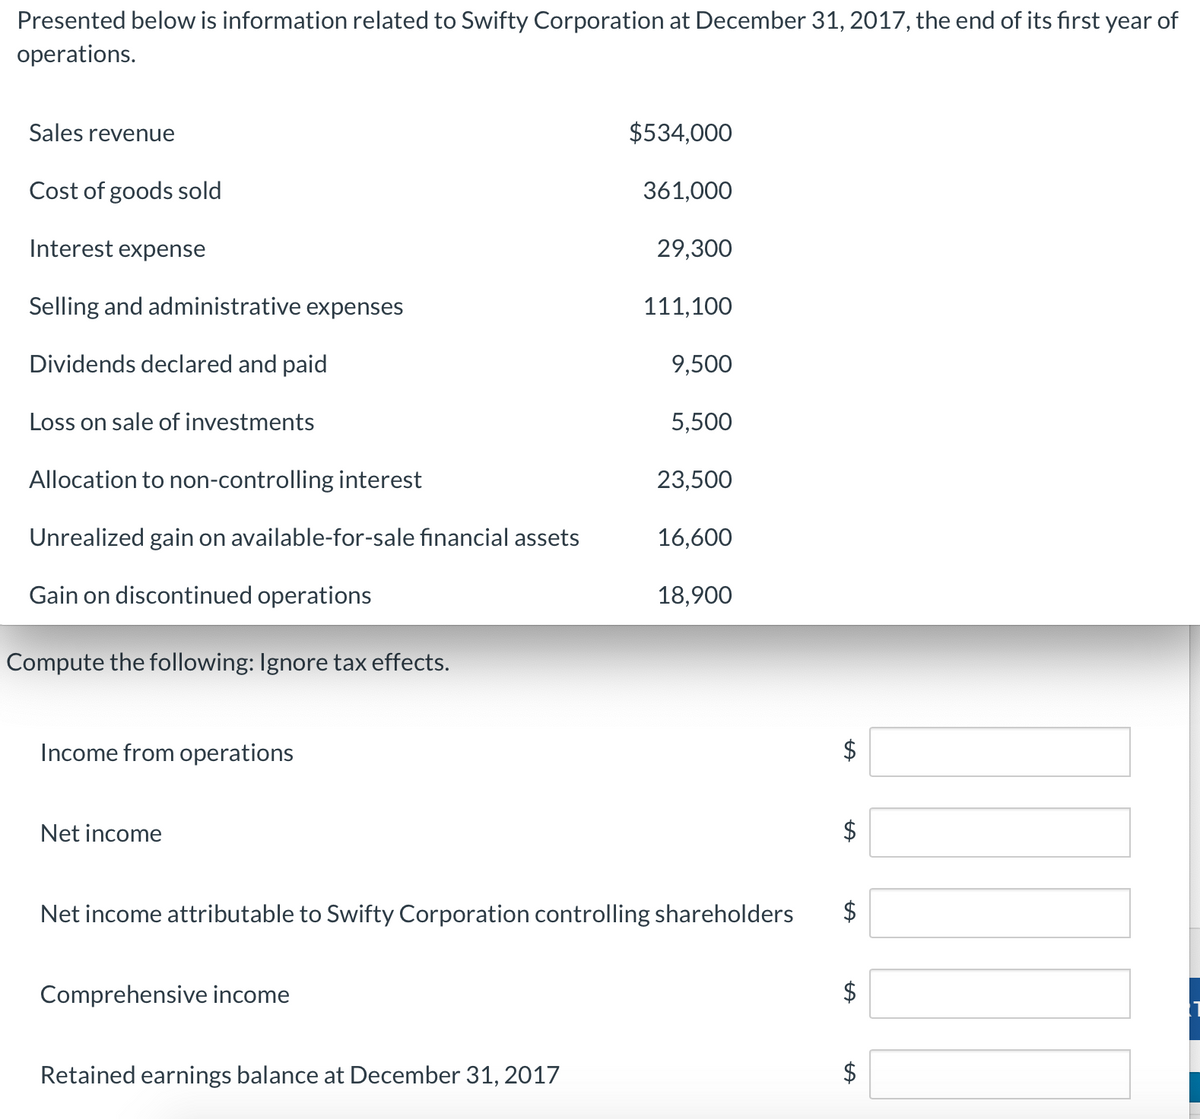 Presented below is information related to Swifty Corporation at December 31, 2017, the end of its first year of
operations.
Sales revenue
Cost of goods sold
Interest expense
Selling and administrative expenses
Dividends declared and paid
Loss on sale of investments
Allocation to non-controlling interest
Unrealized gain on available-for-sale financial assets
Gain on discontinued operations
Compute the following: Ignore tax effects.
Income from operations
Net income
Comprehensive income
$534,000
361,000
Retained earnings balance at December 31, 2017
29,300
111,100
9,500
5,500
23,500
16,600
Net income attributable to Swifty Corporation controlling shareholders
18,900
$
LA
$
LA
$